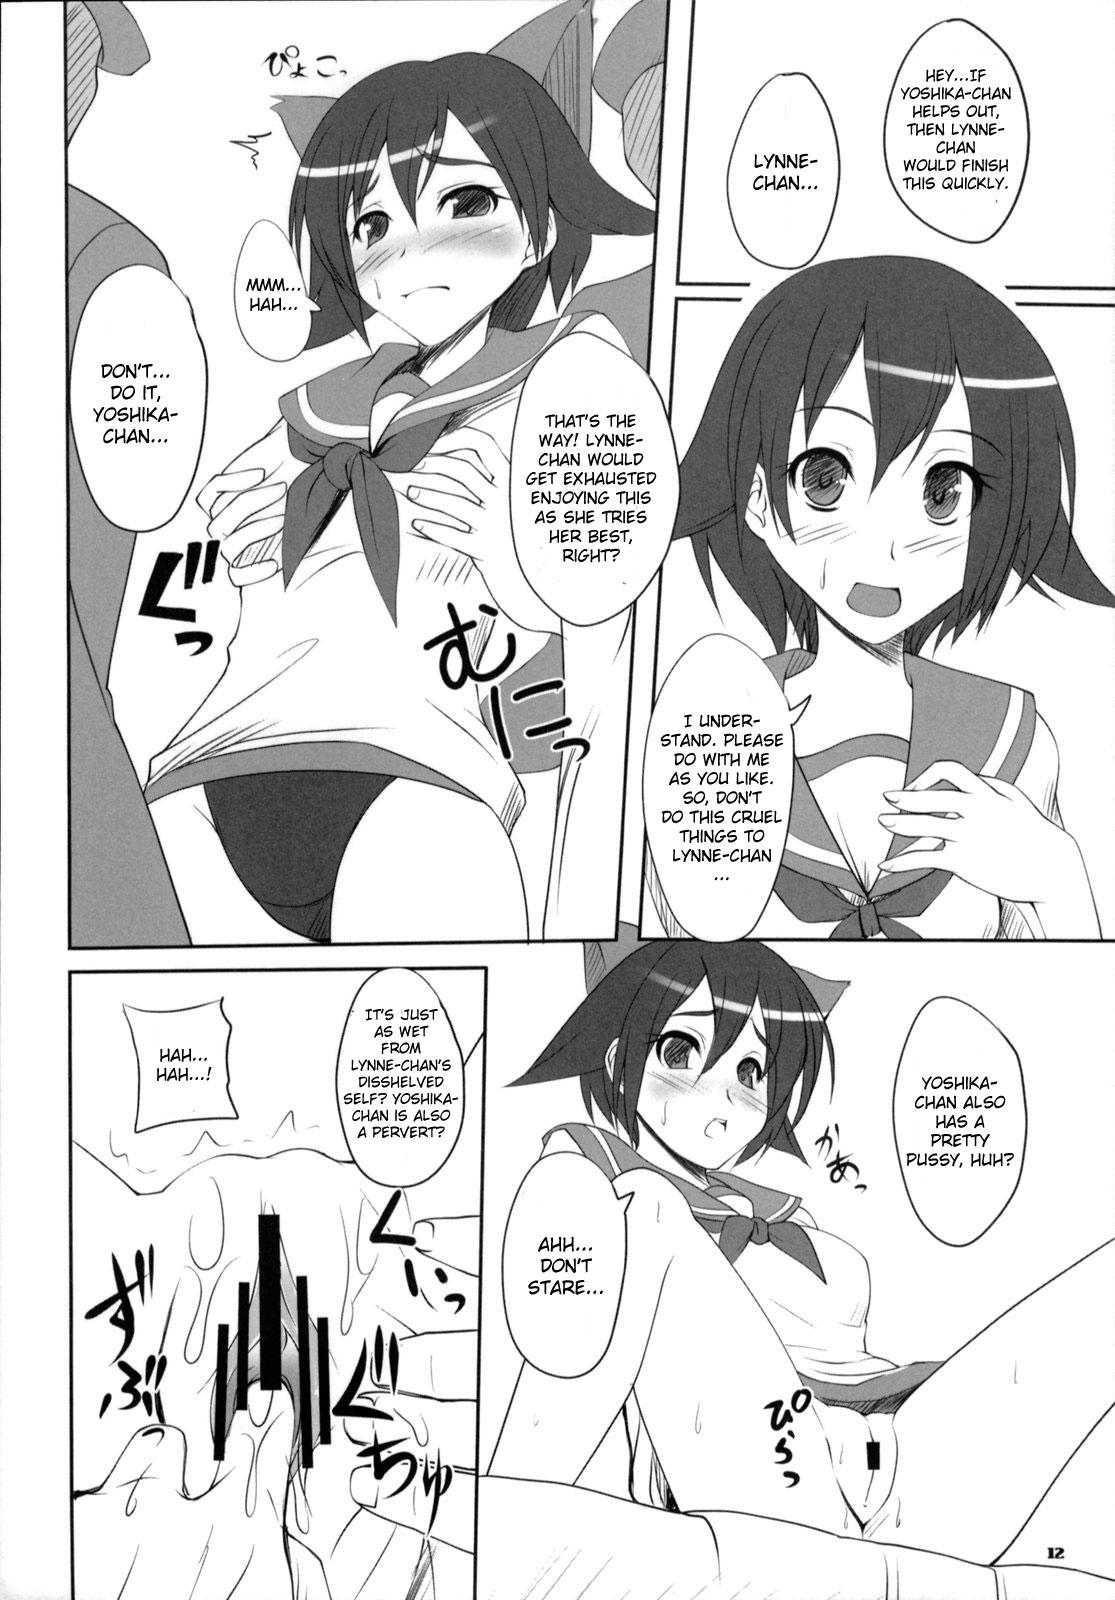 Animated Oppantsu Strike - Strike witches Relax - Page 12